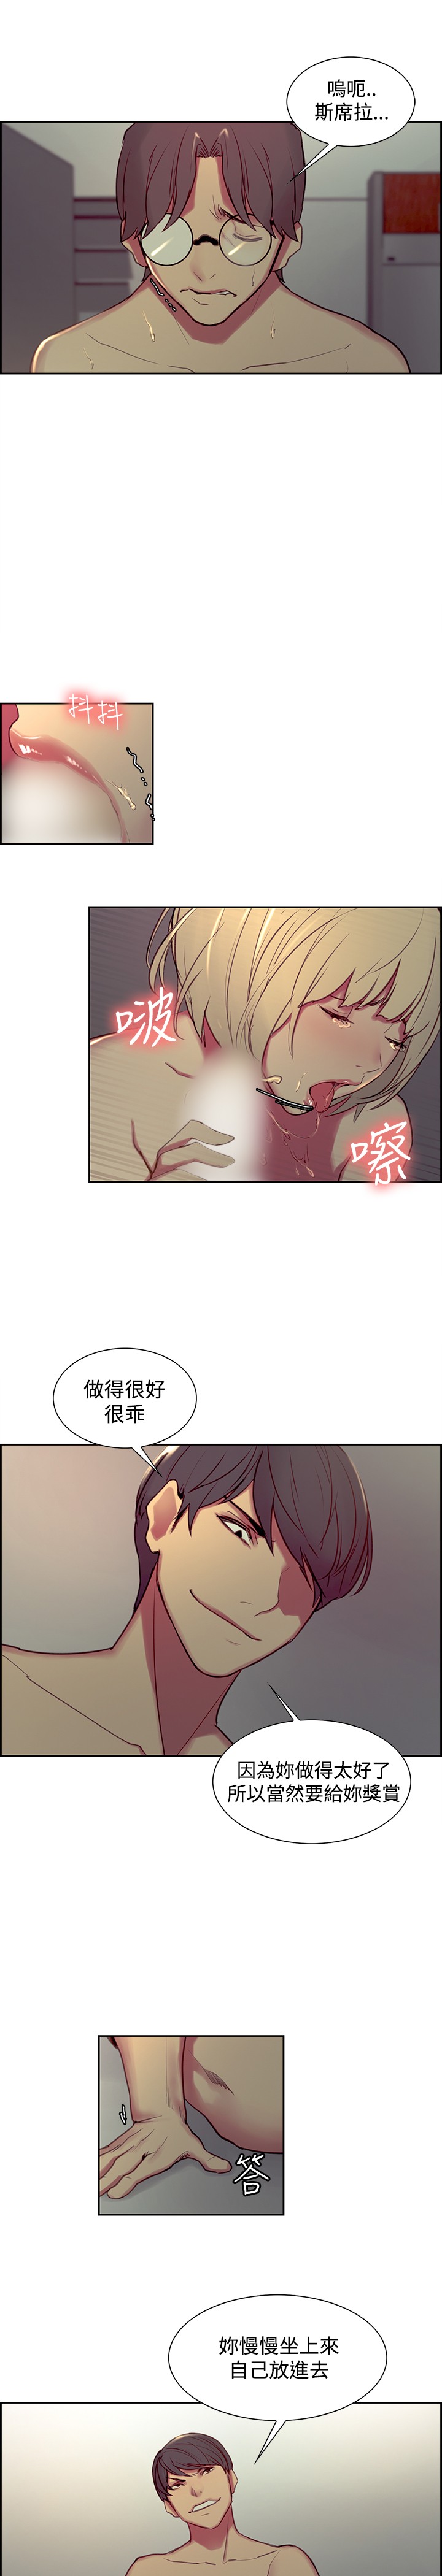 [Serious] Domesticate the Housekeeper 调教家政妇 Ch.29~41 [Chinese]中文 page 11 full